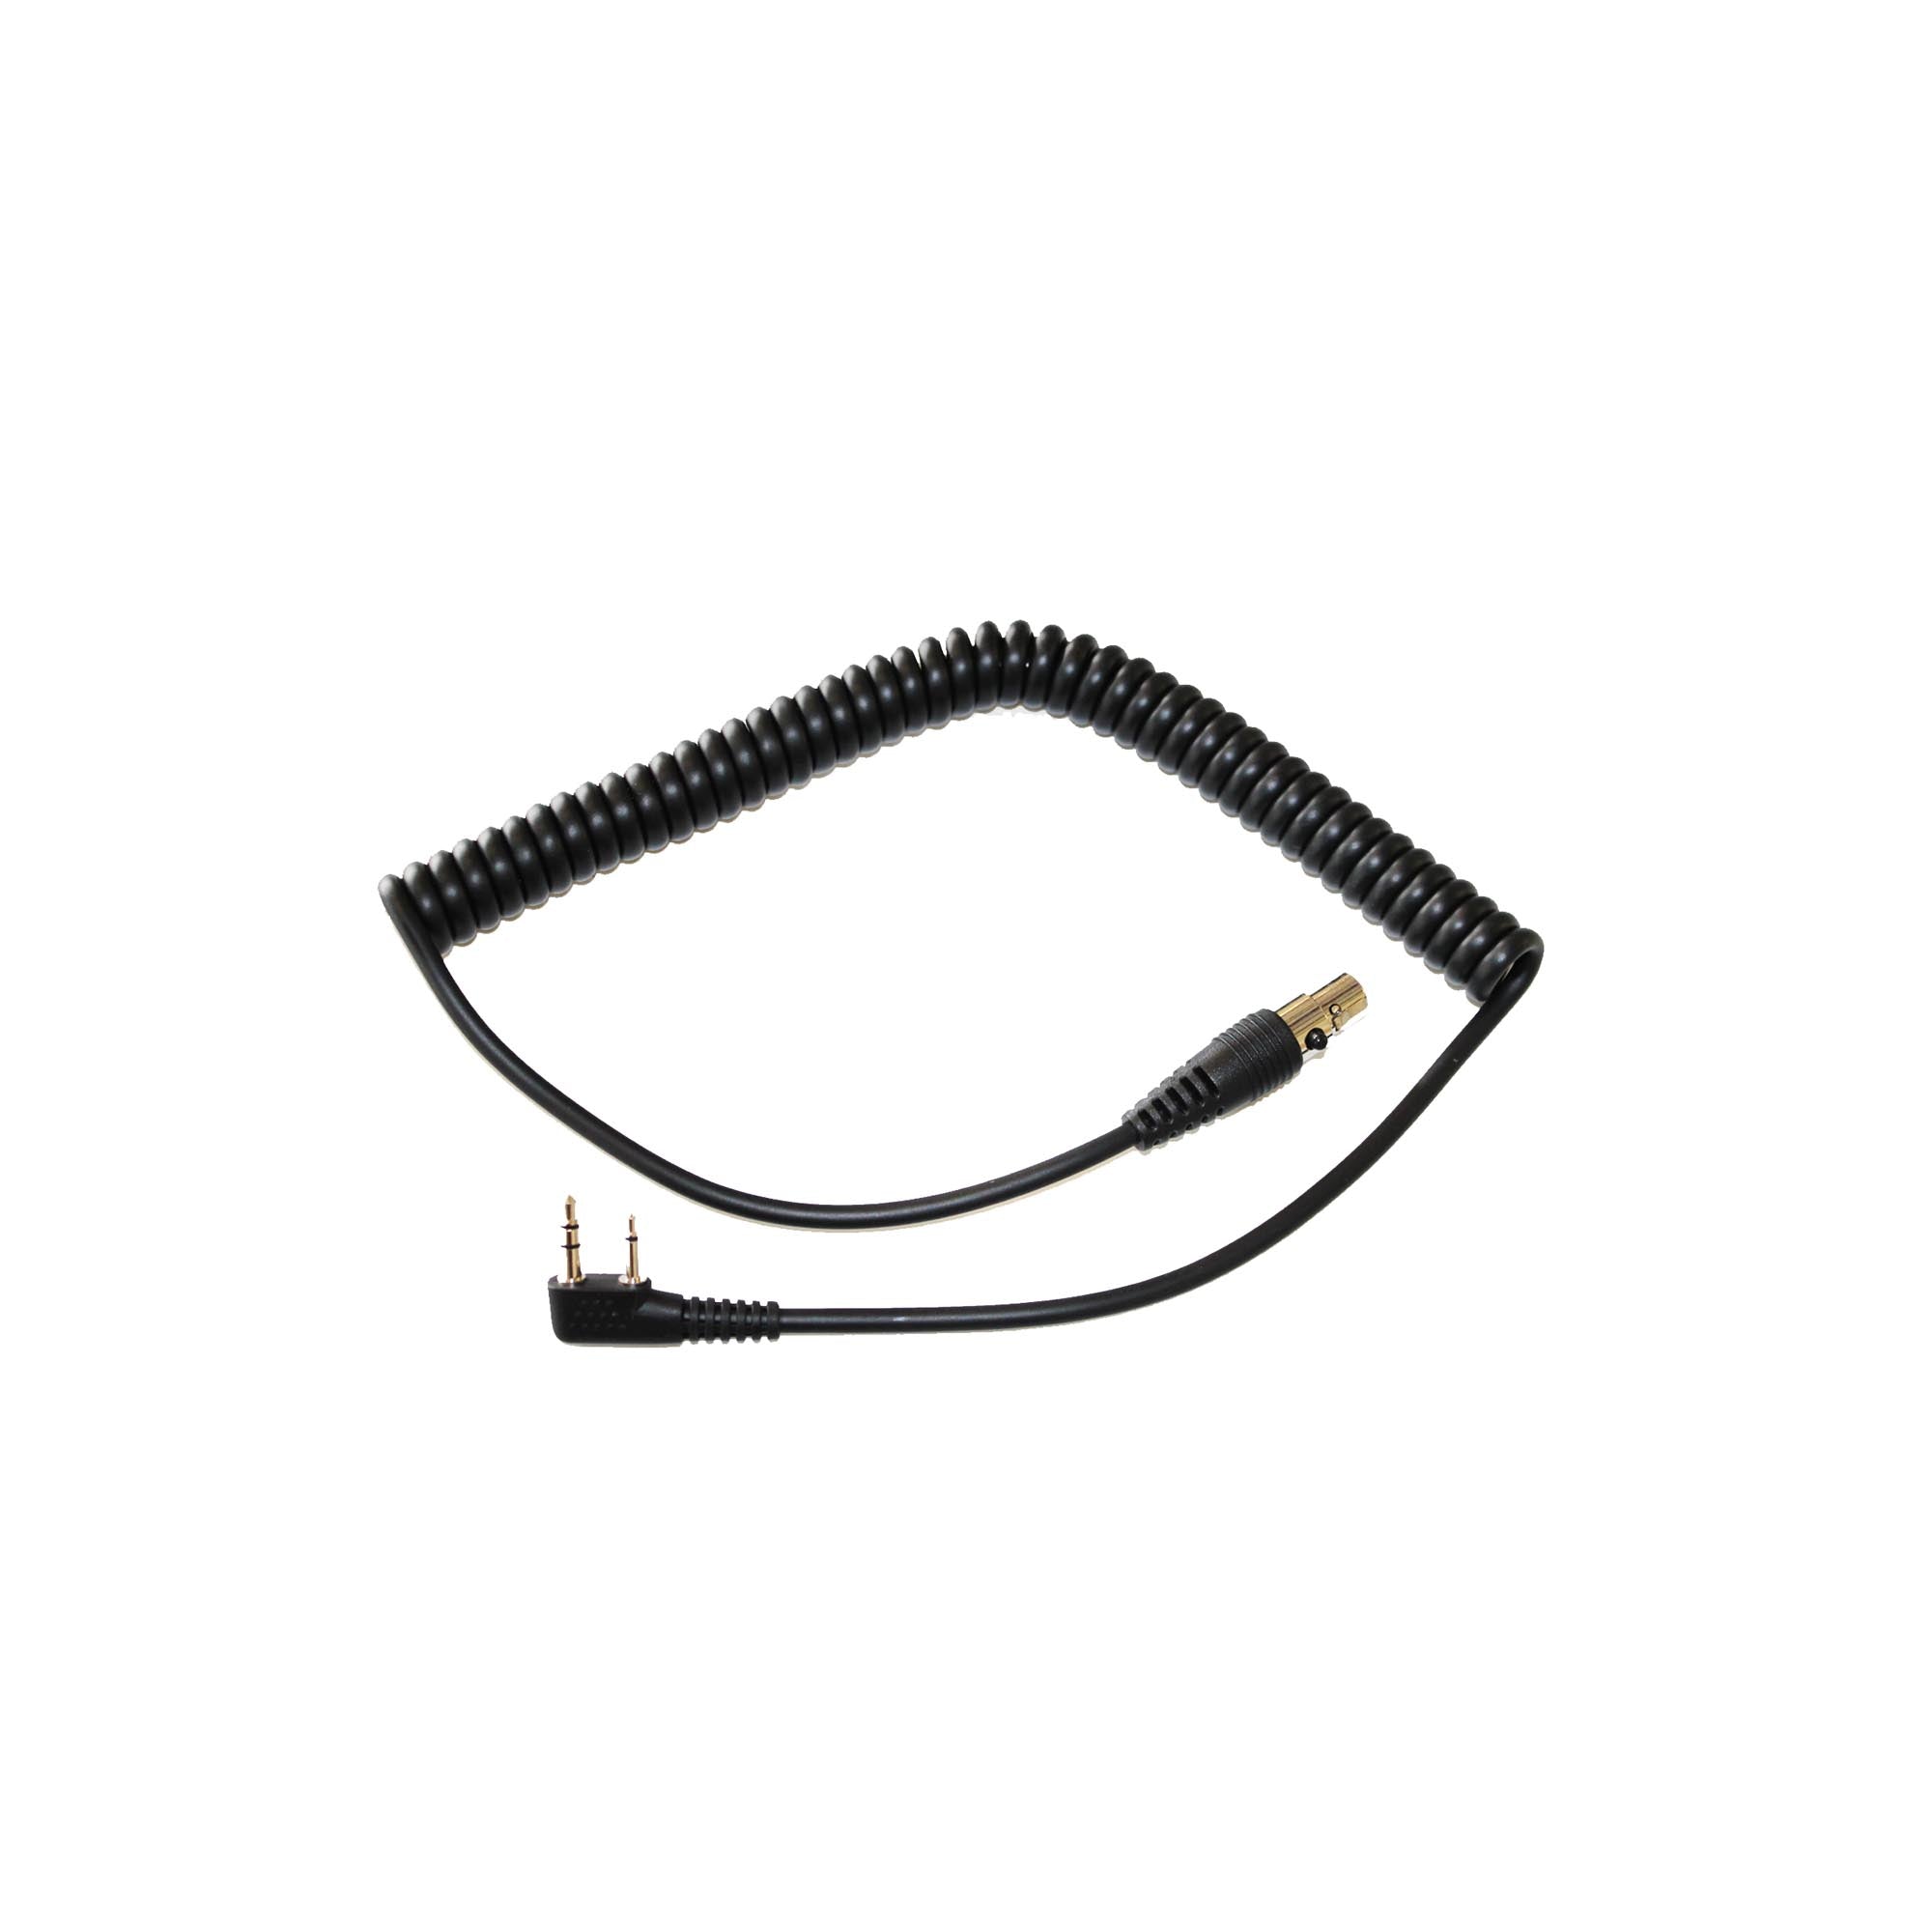 Kenwood Headset Cable